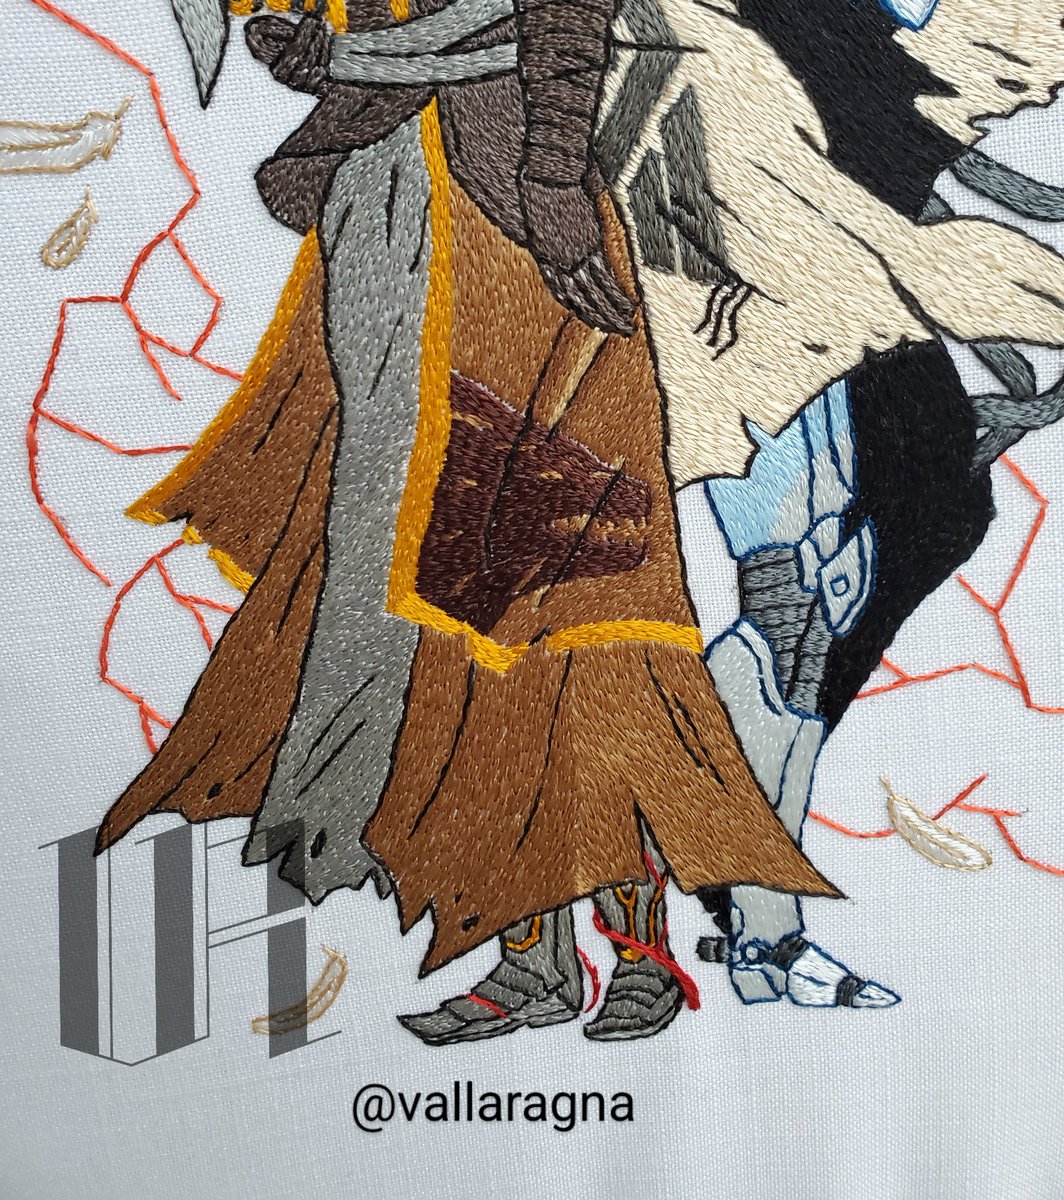 The Tyrant's Lament

Silk hand embroidery on linen
Based on work by @sketchmatters
#destiny2art #destiny2 #embroidery #destiny2AOTW